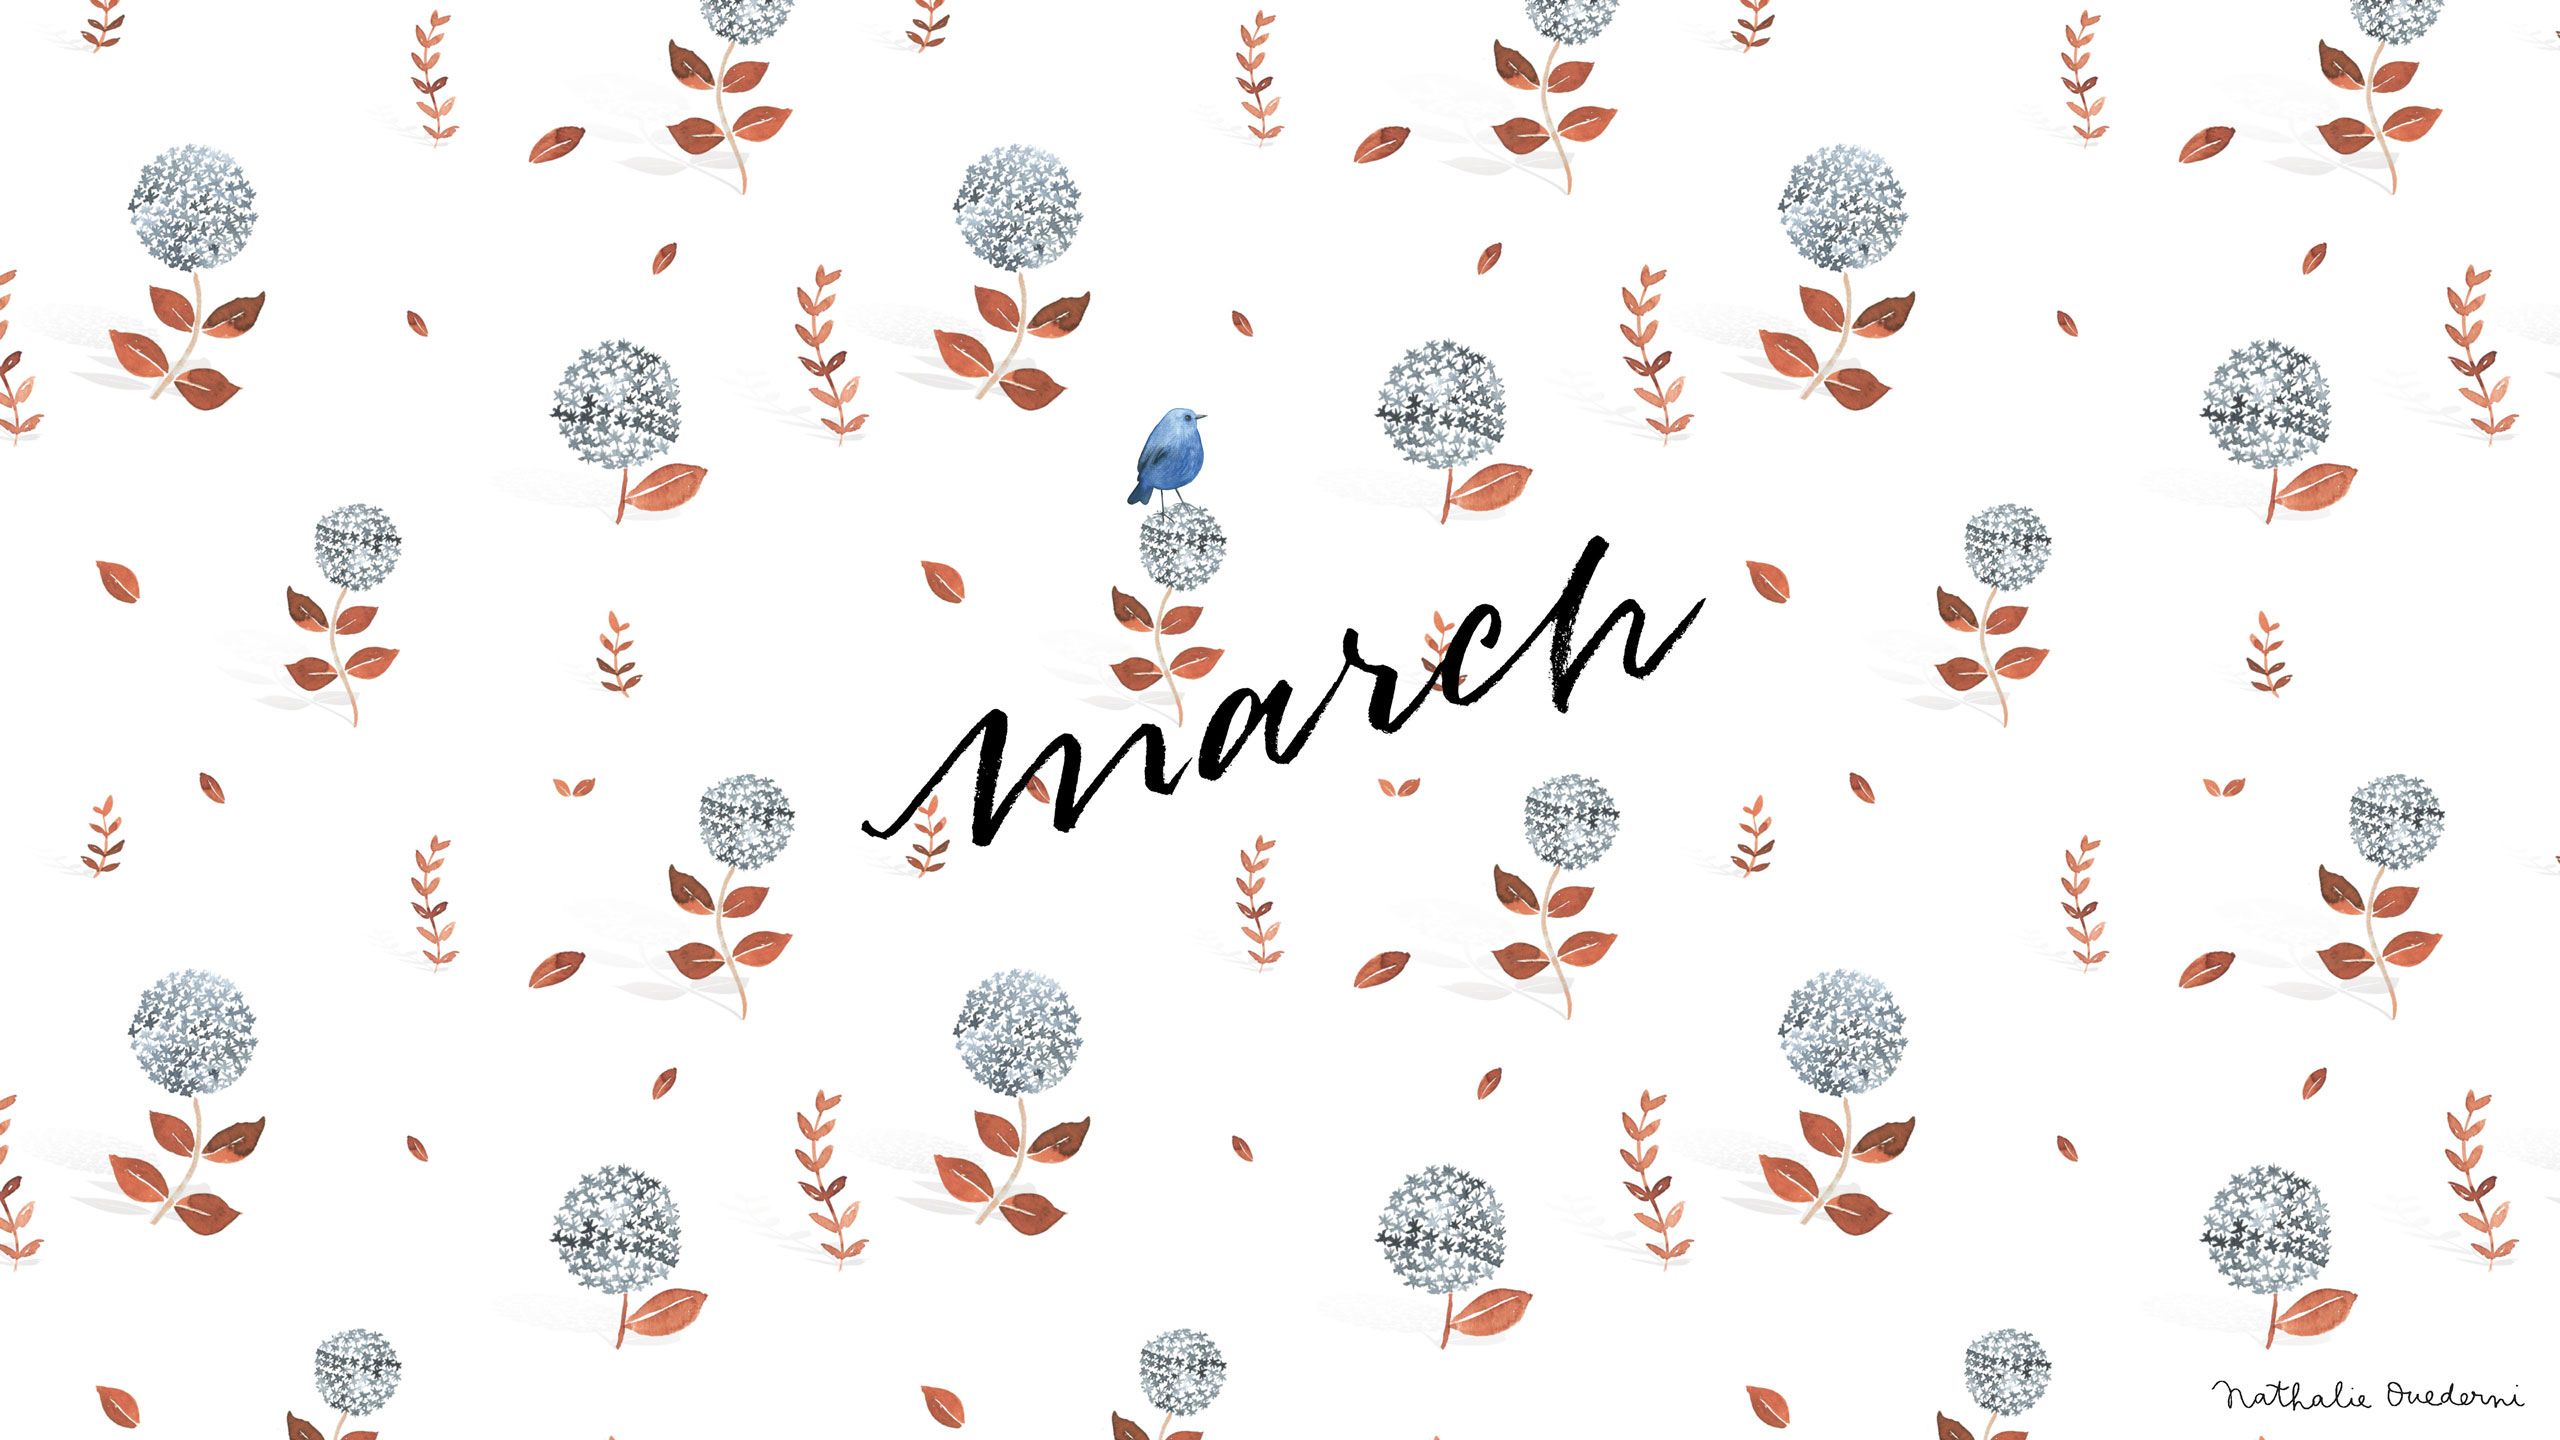 A March wallpaper with blue birds and flowers. - March